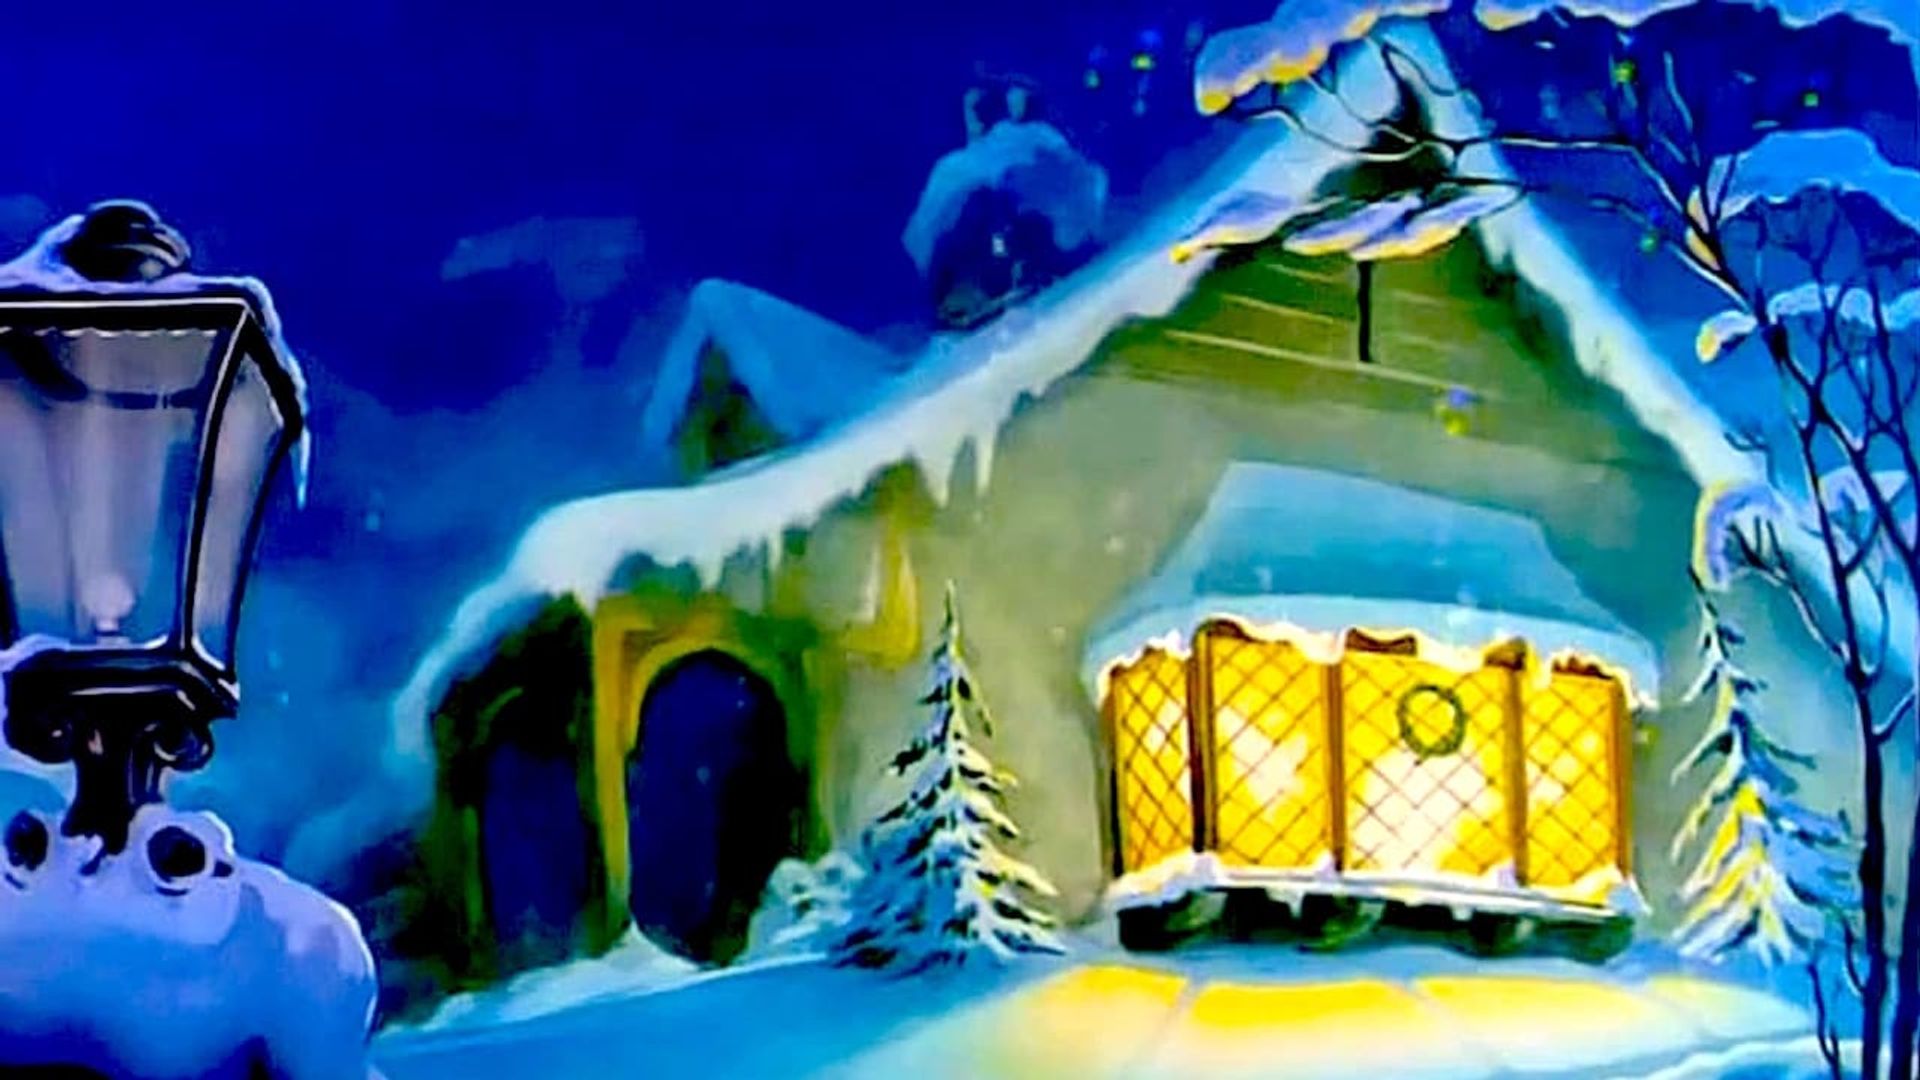 The Night Before Christmas background